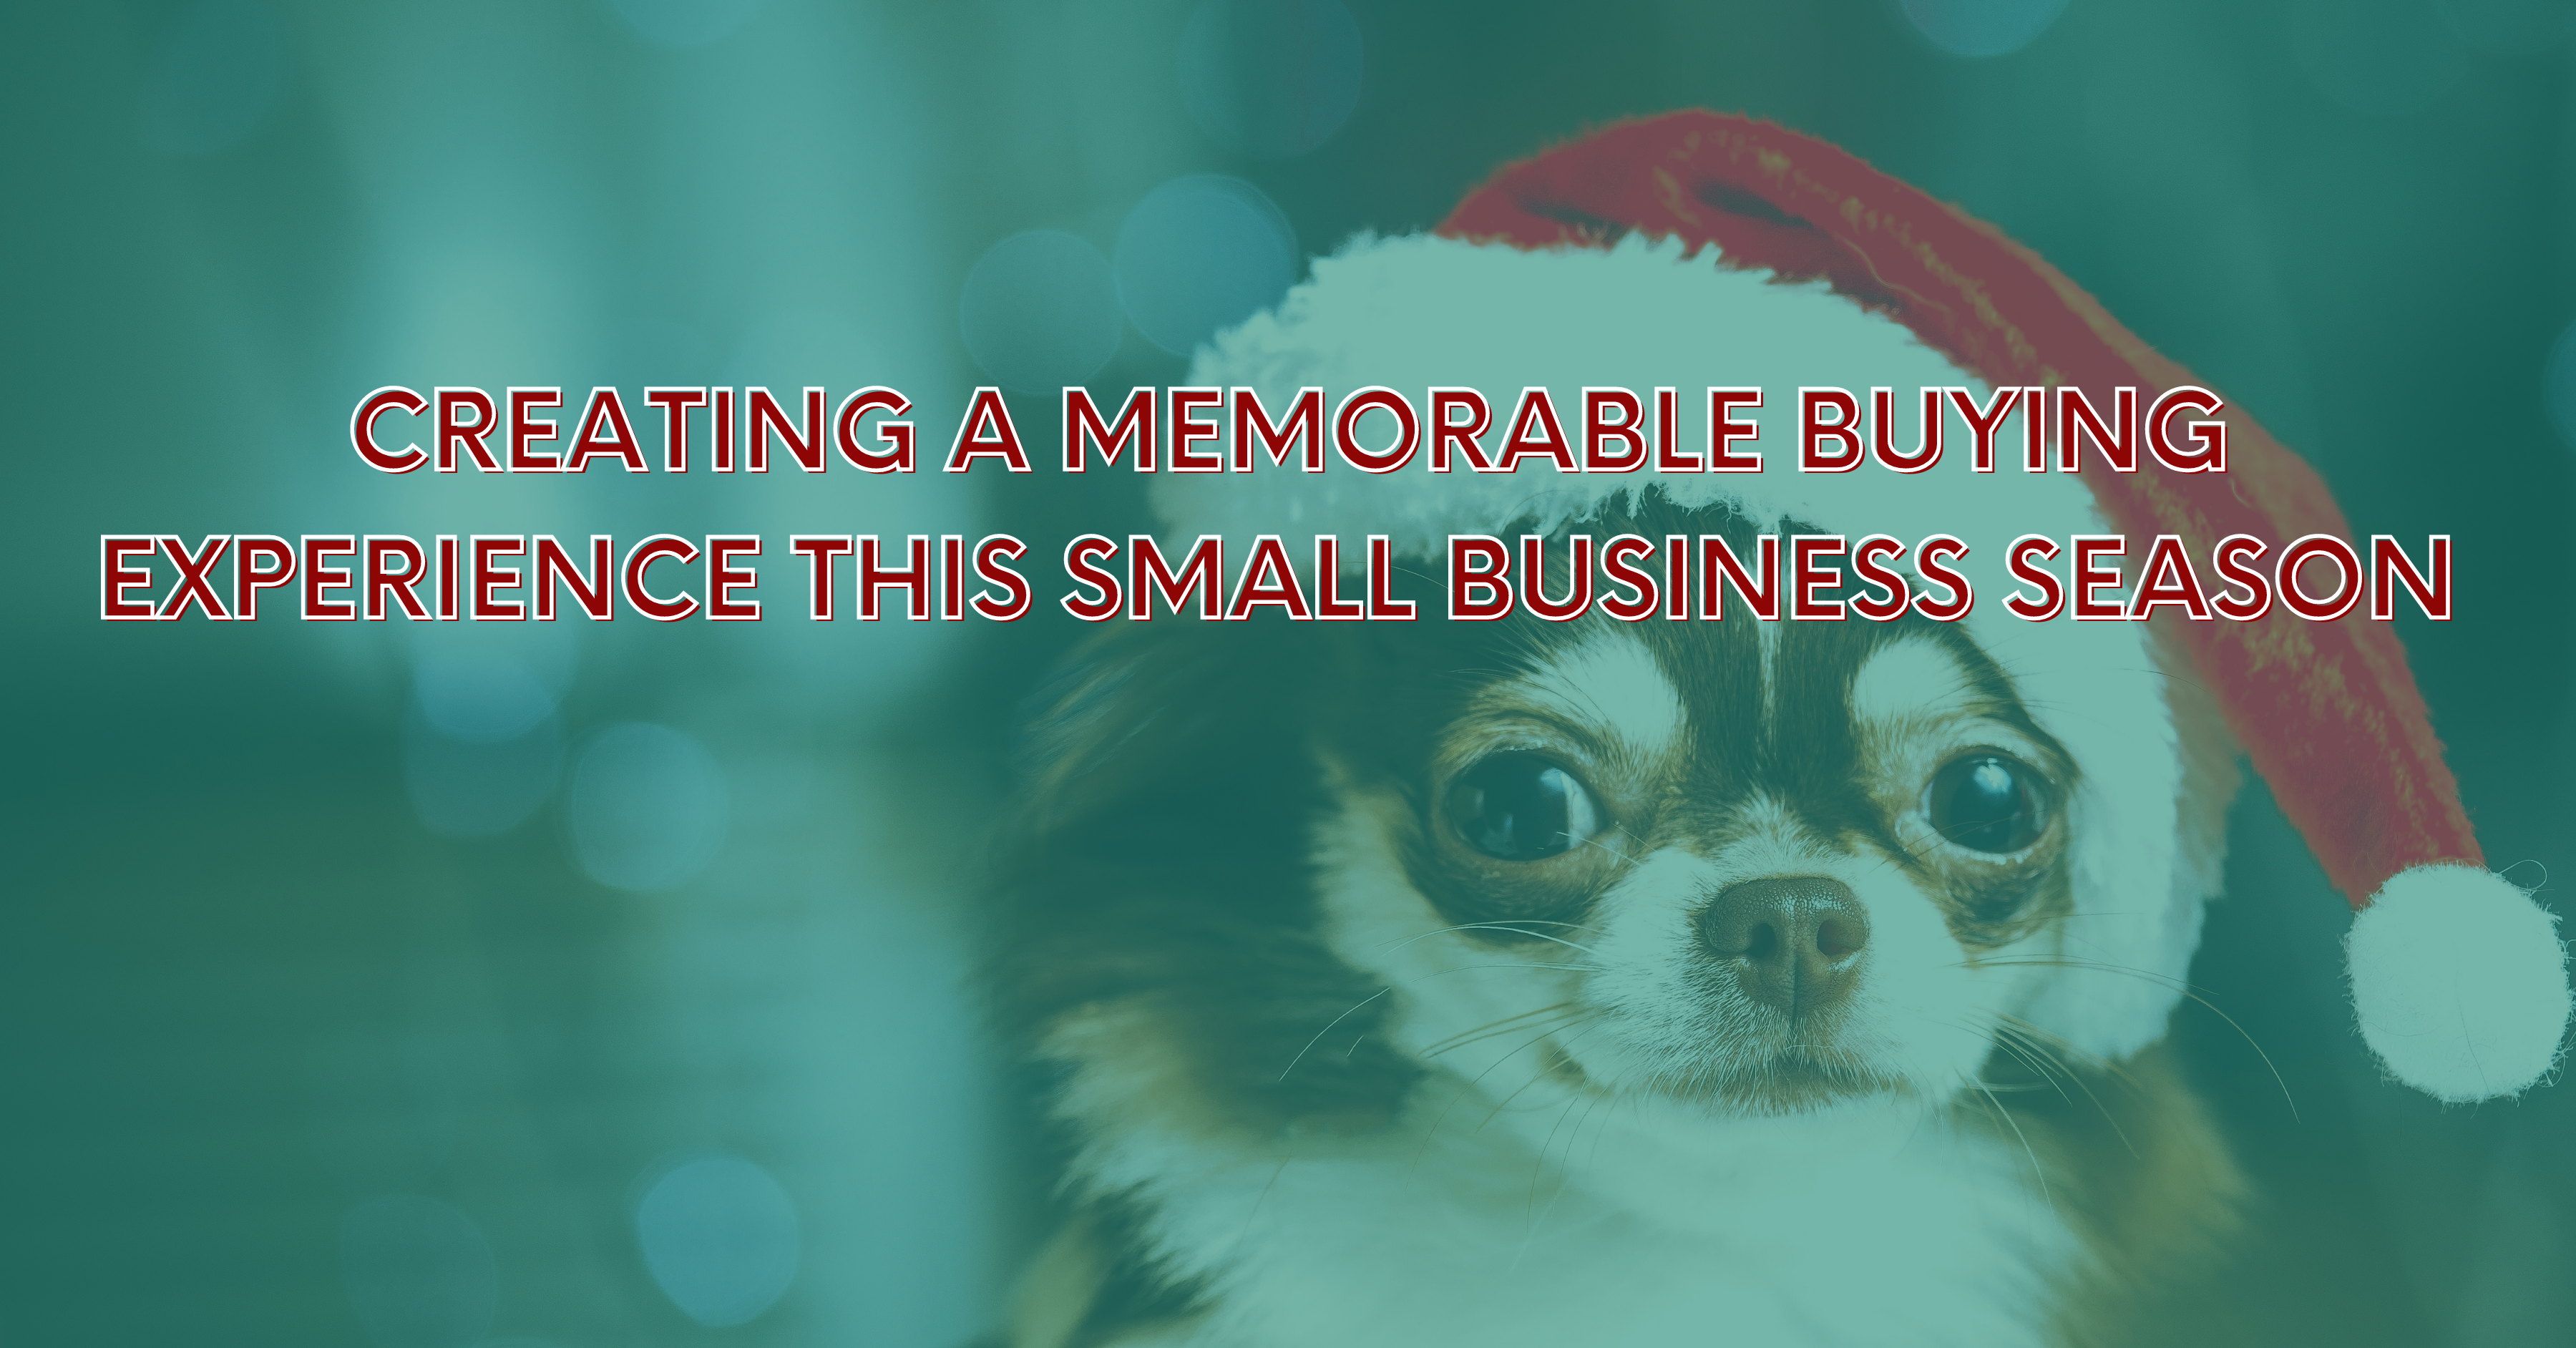 Image for Creating a Memorable Buying Experience This Small Business Season